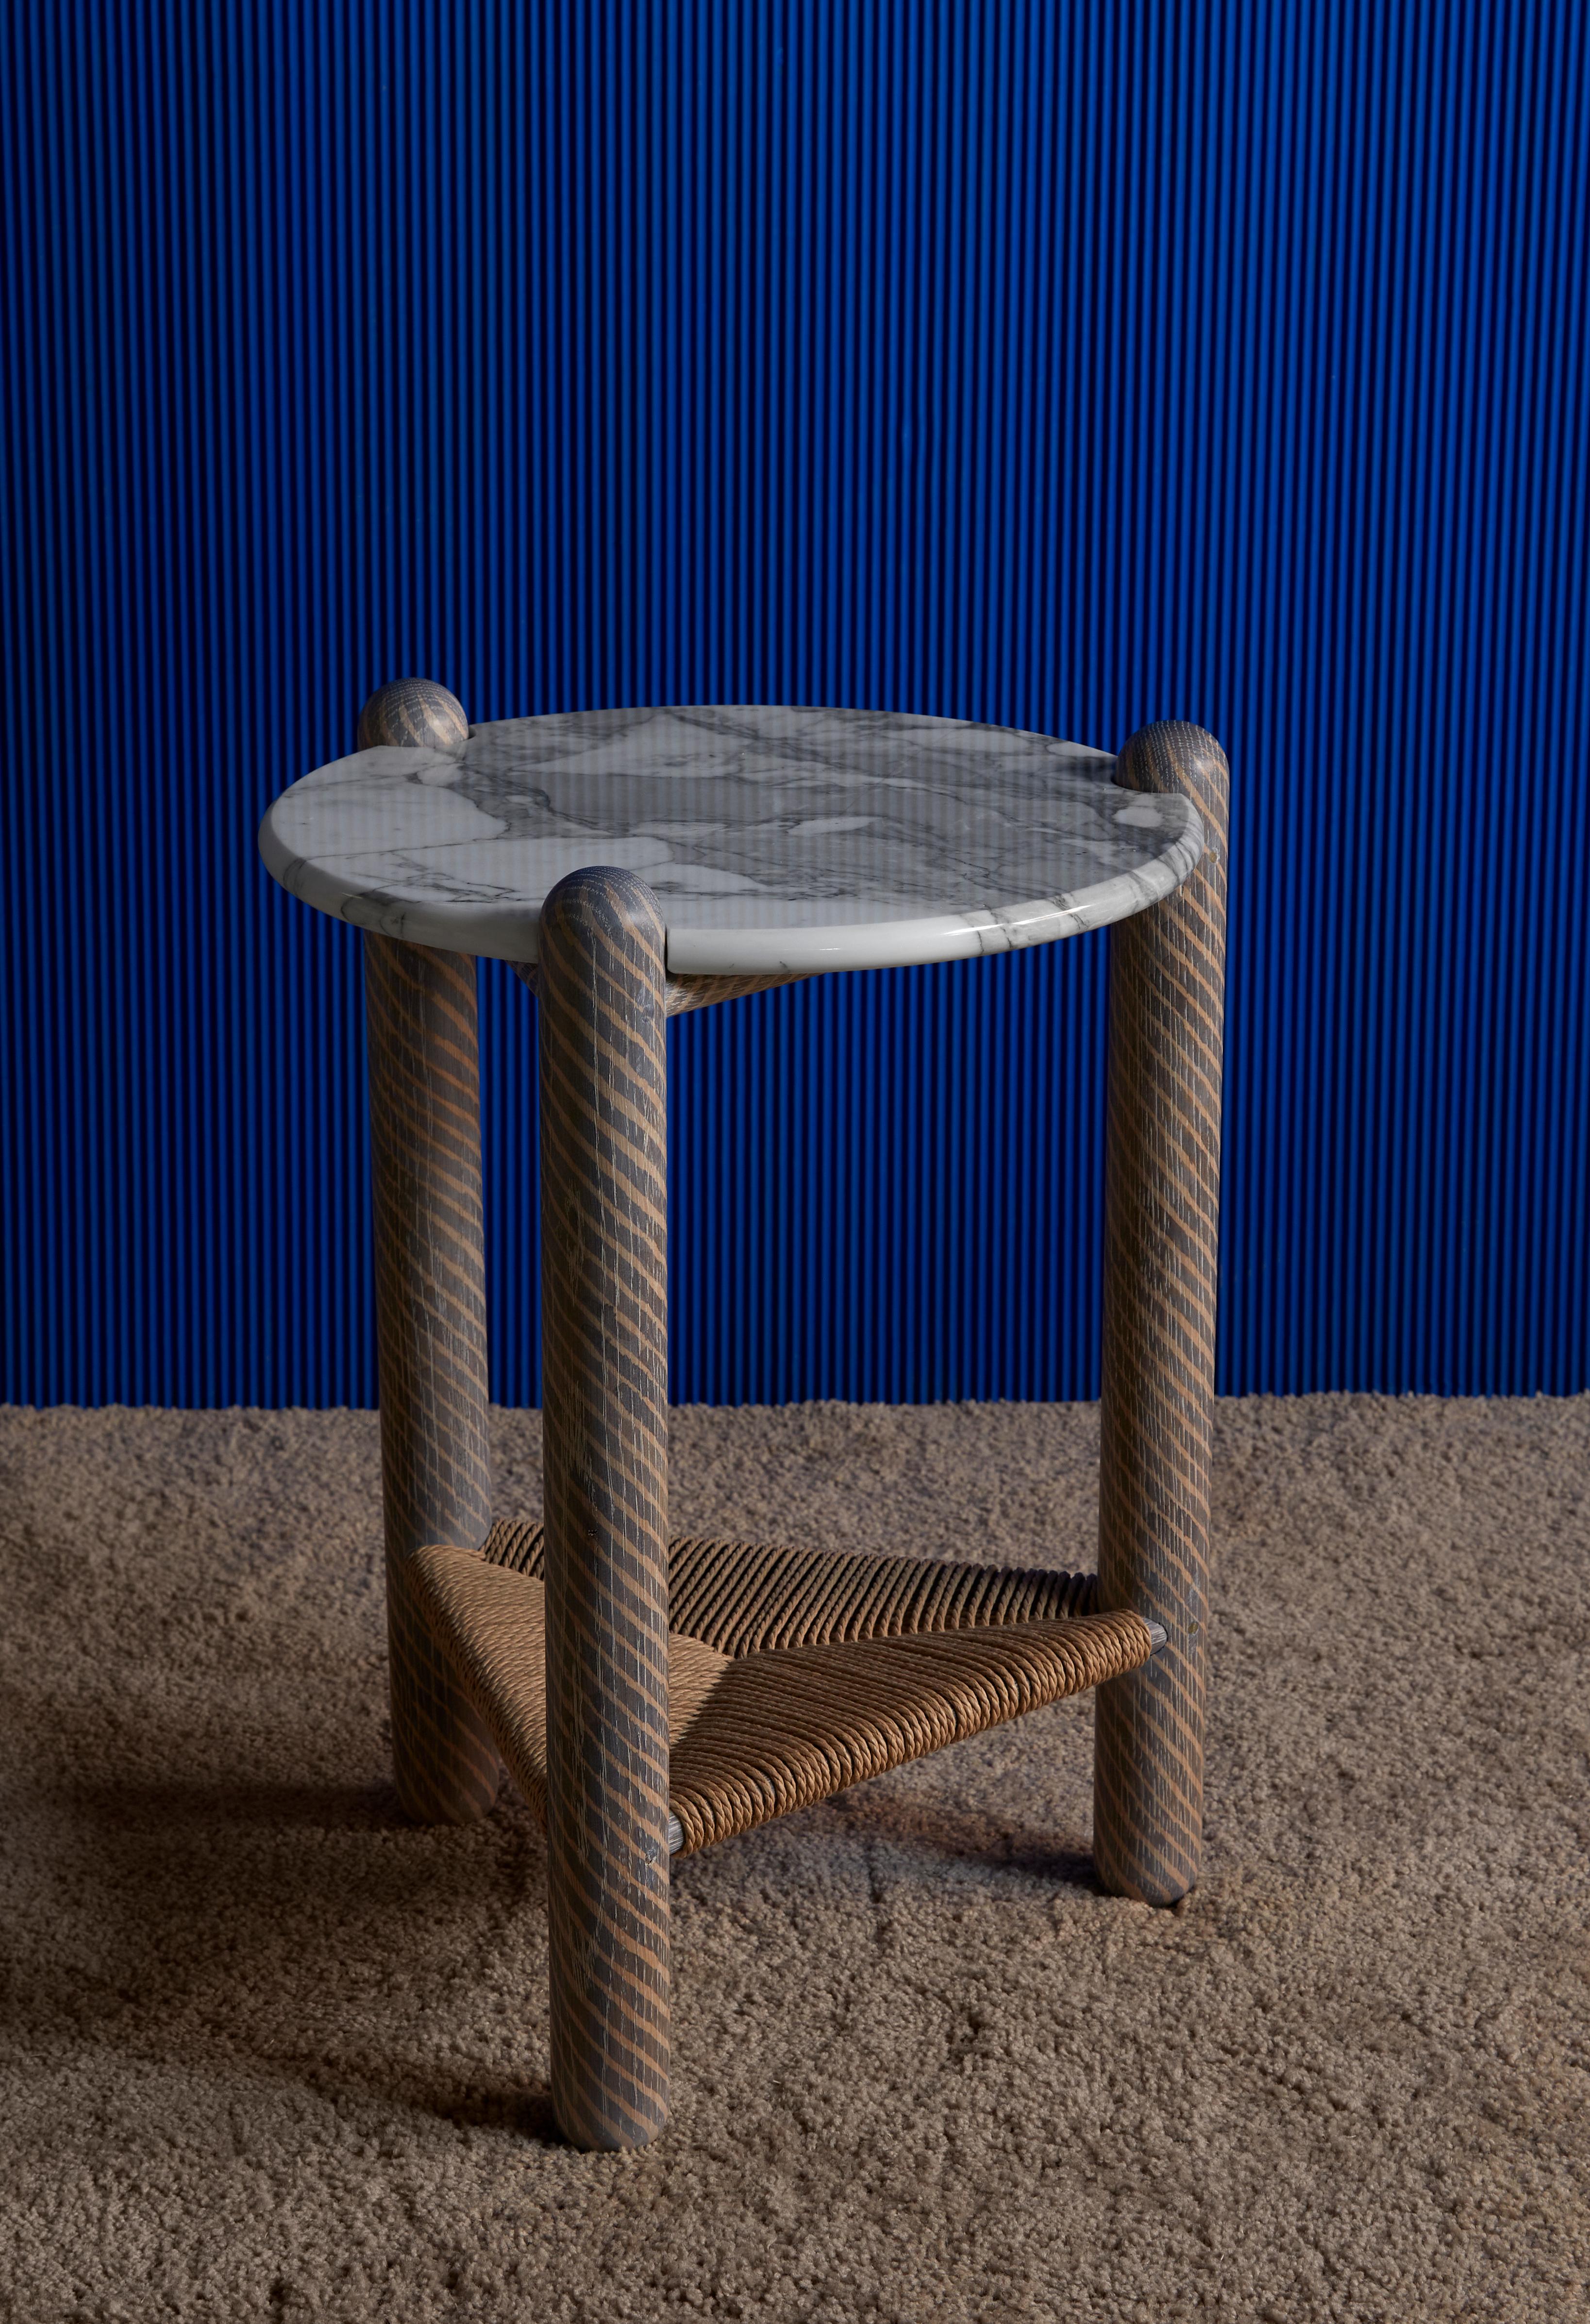 Captain's side table by Hamilton Holmes.
Oxalino Collection 
2020
Dimensions: D 38.1, W 38.1, H 50.8 cm.
Materials: White oak, Calcatta marble, natural Danish cord, oxidized treatment.

These solid oak three legged tables feature handwoven